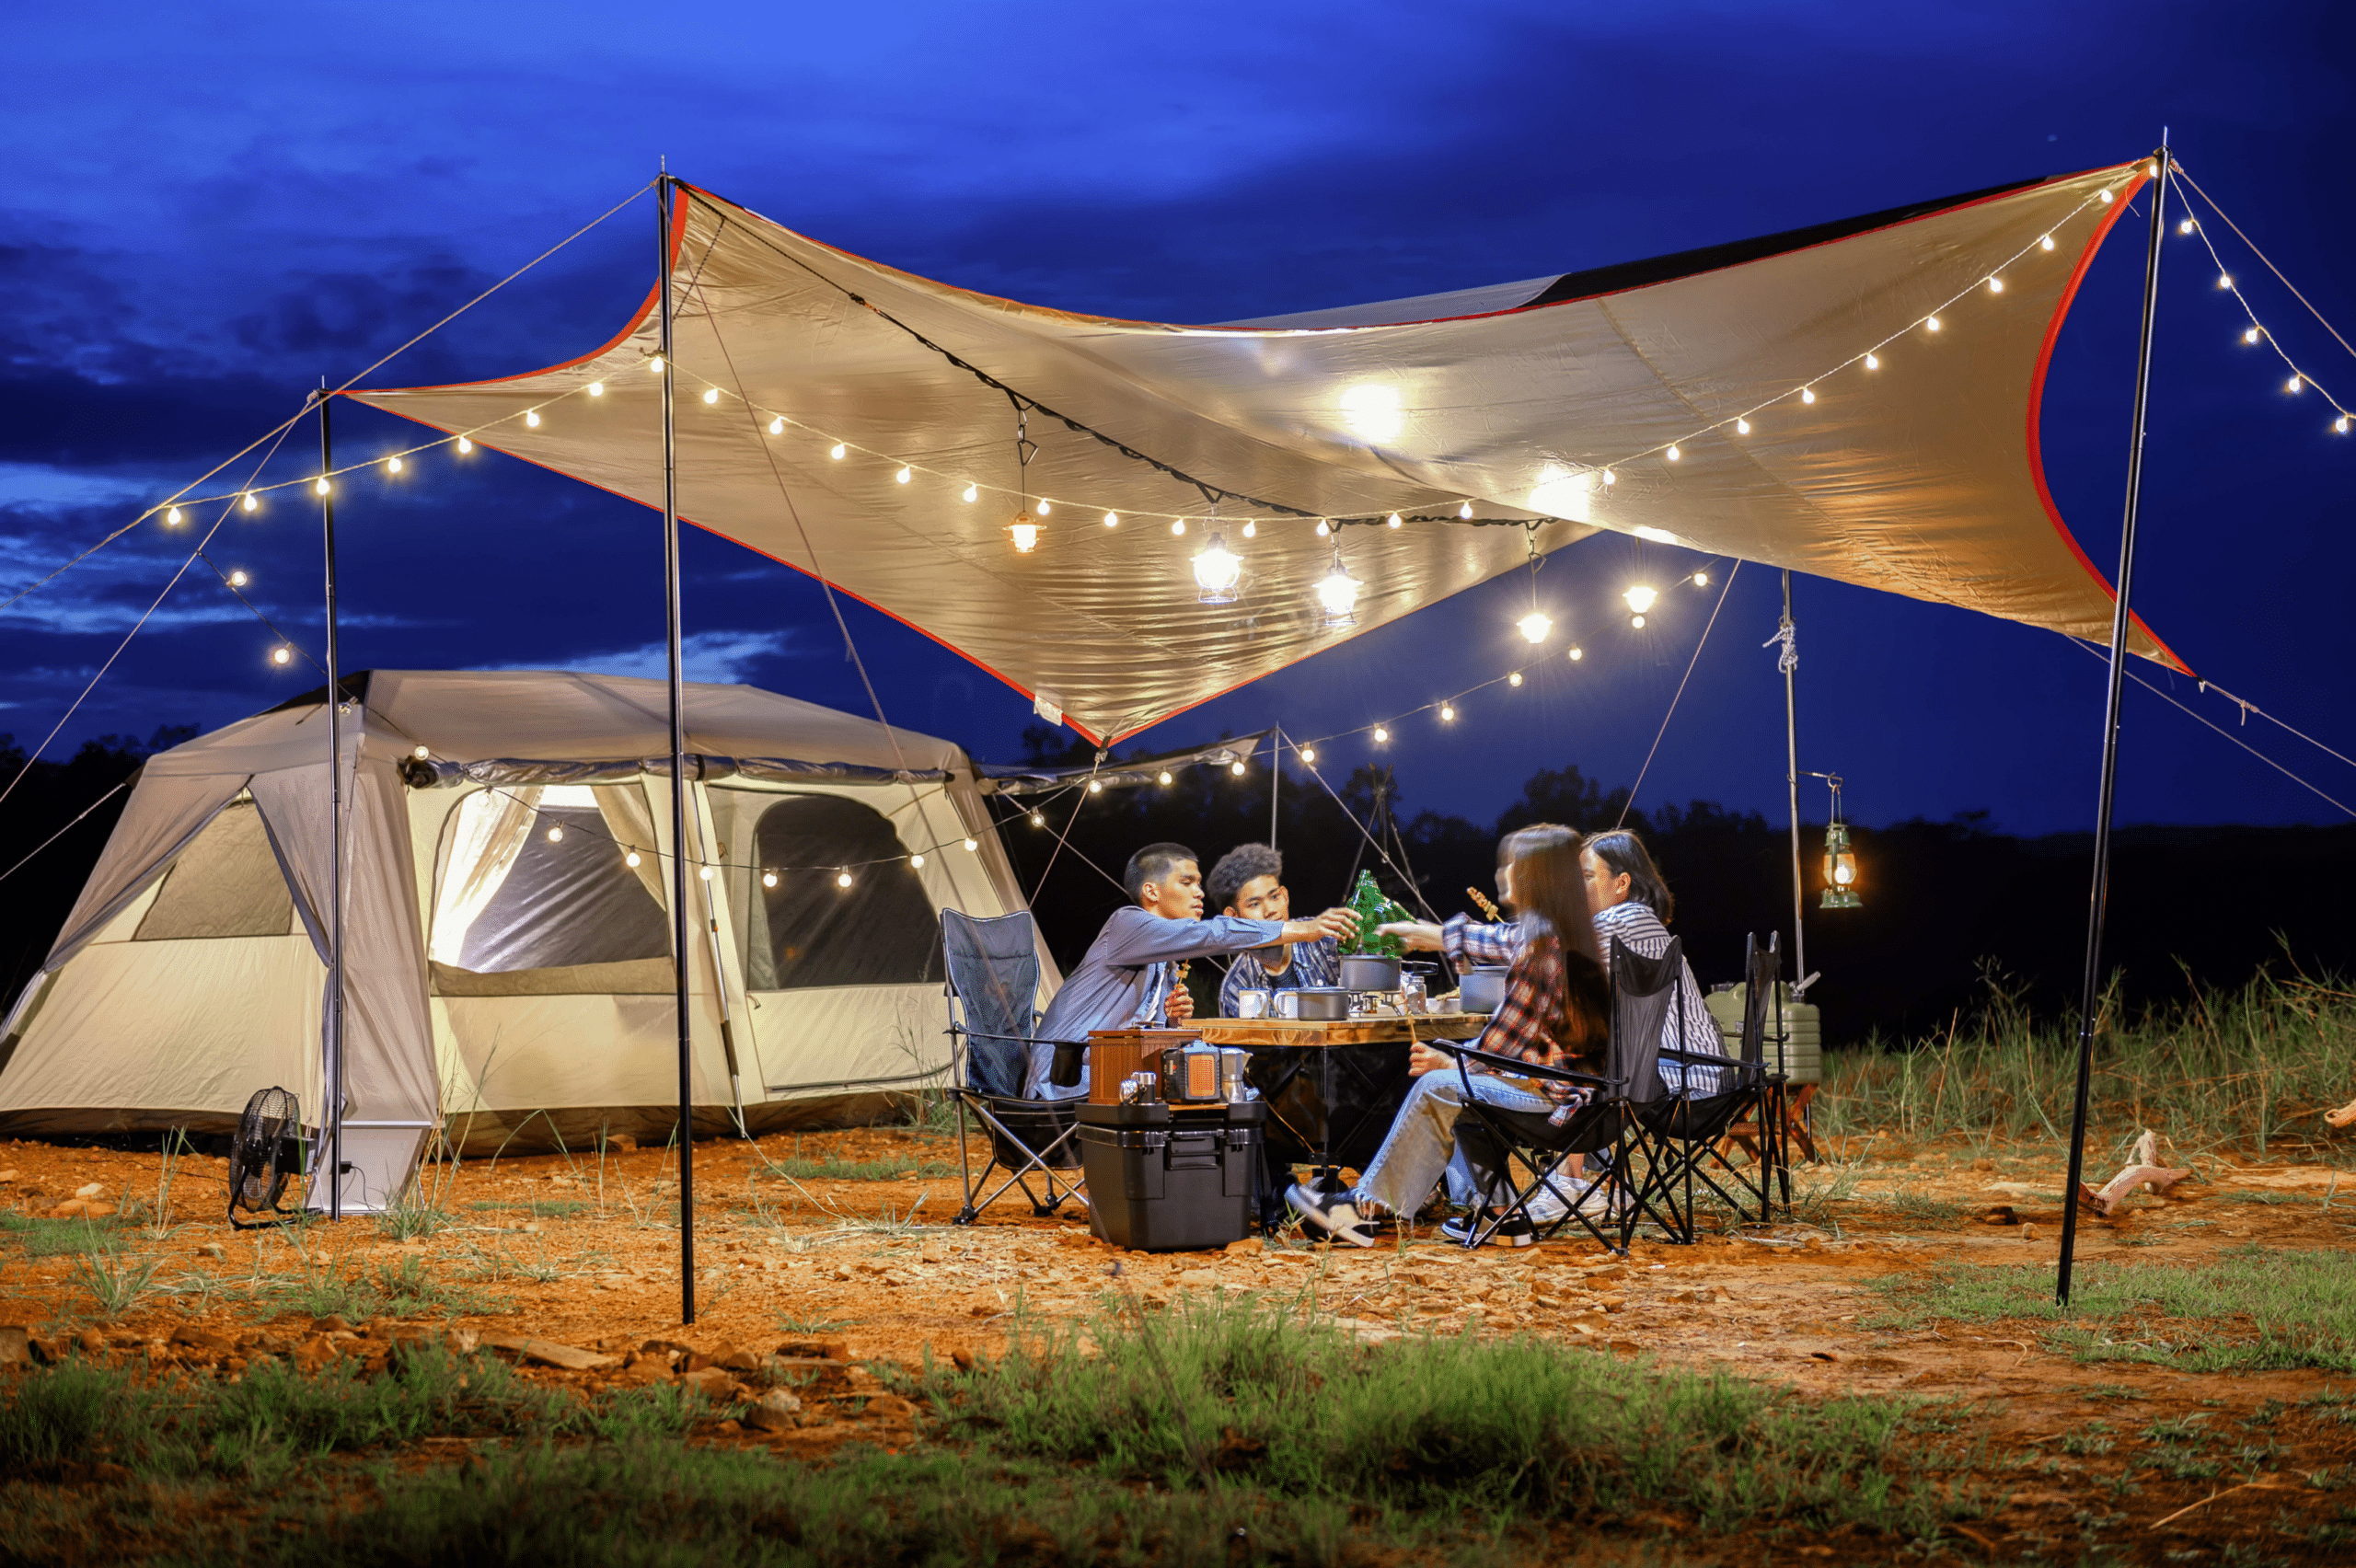 high-end tent with fairy lights that a group of people are eating together under